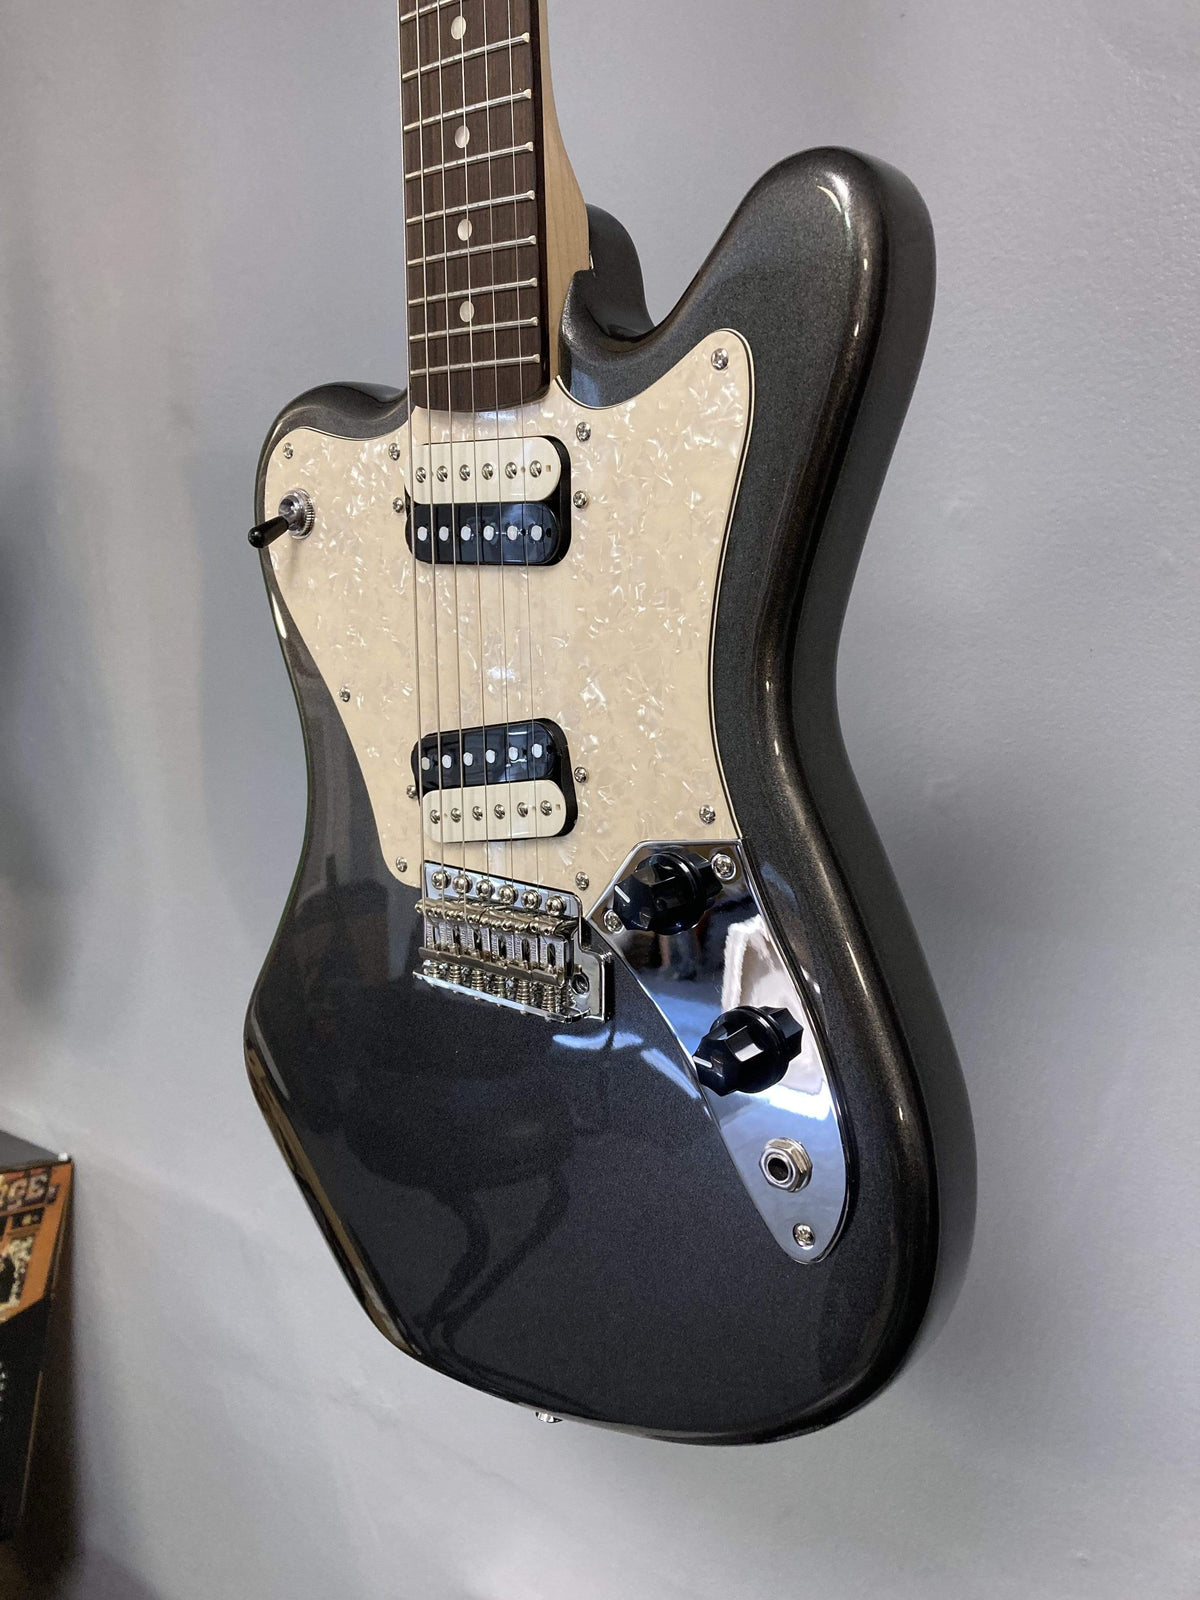 Squier Paranormal Supersonic Electric Guitar Guitars on Main